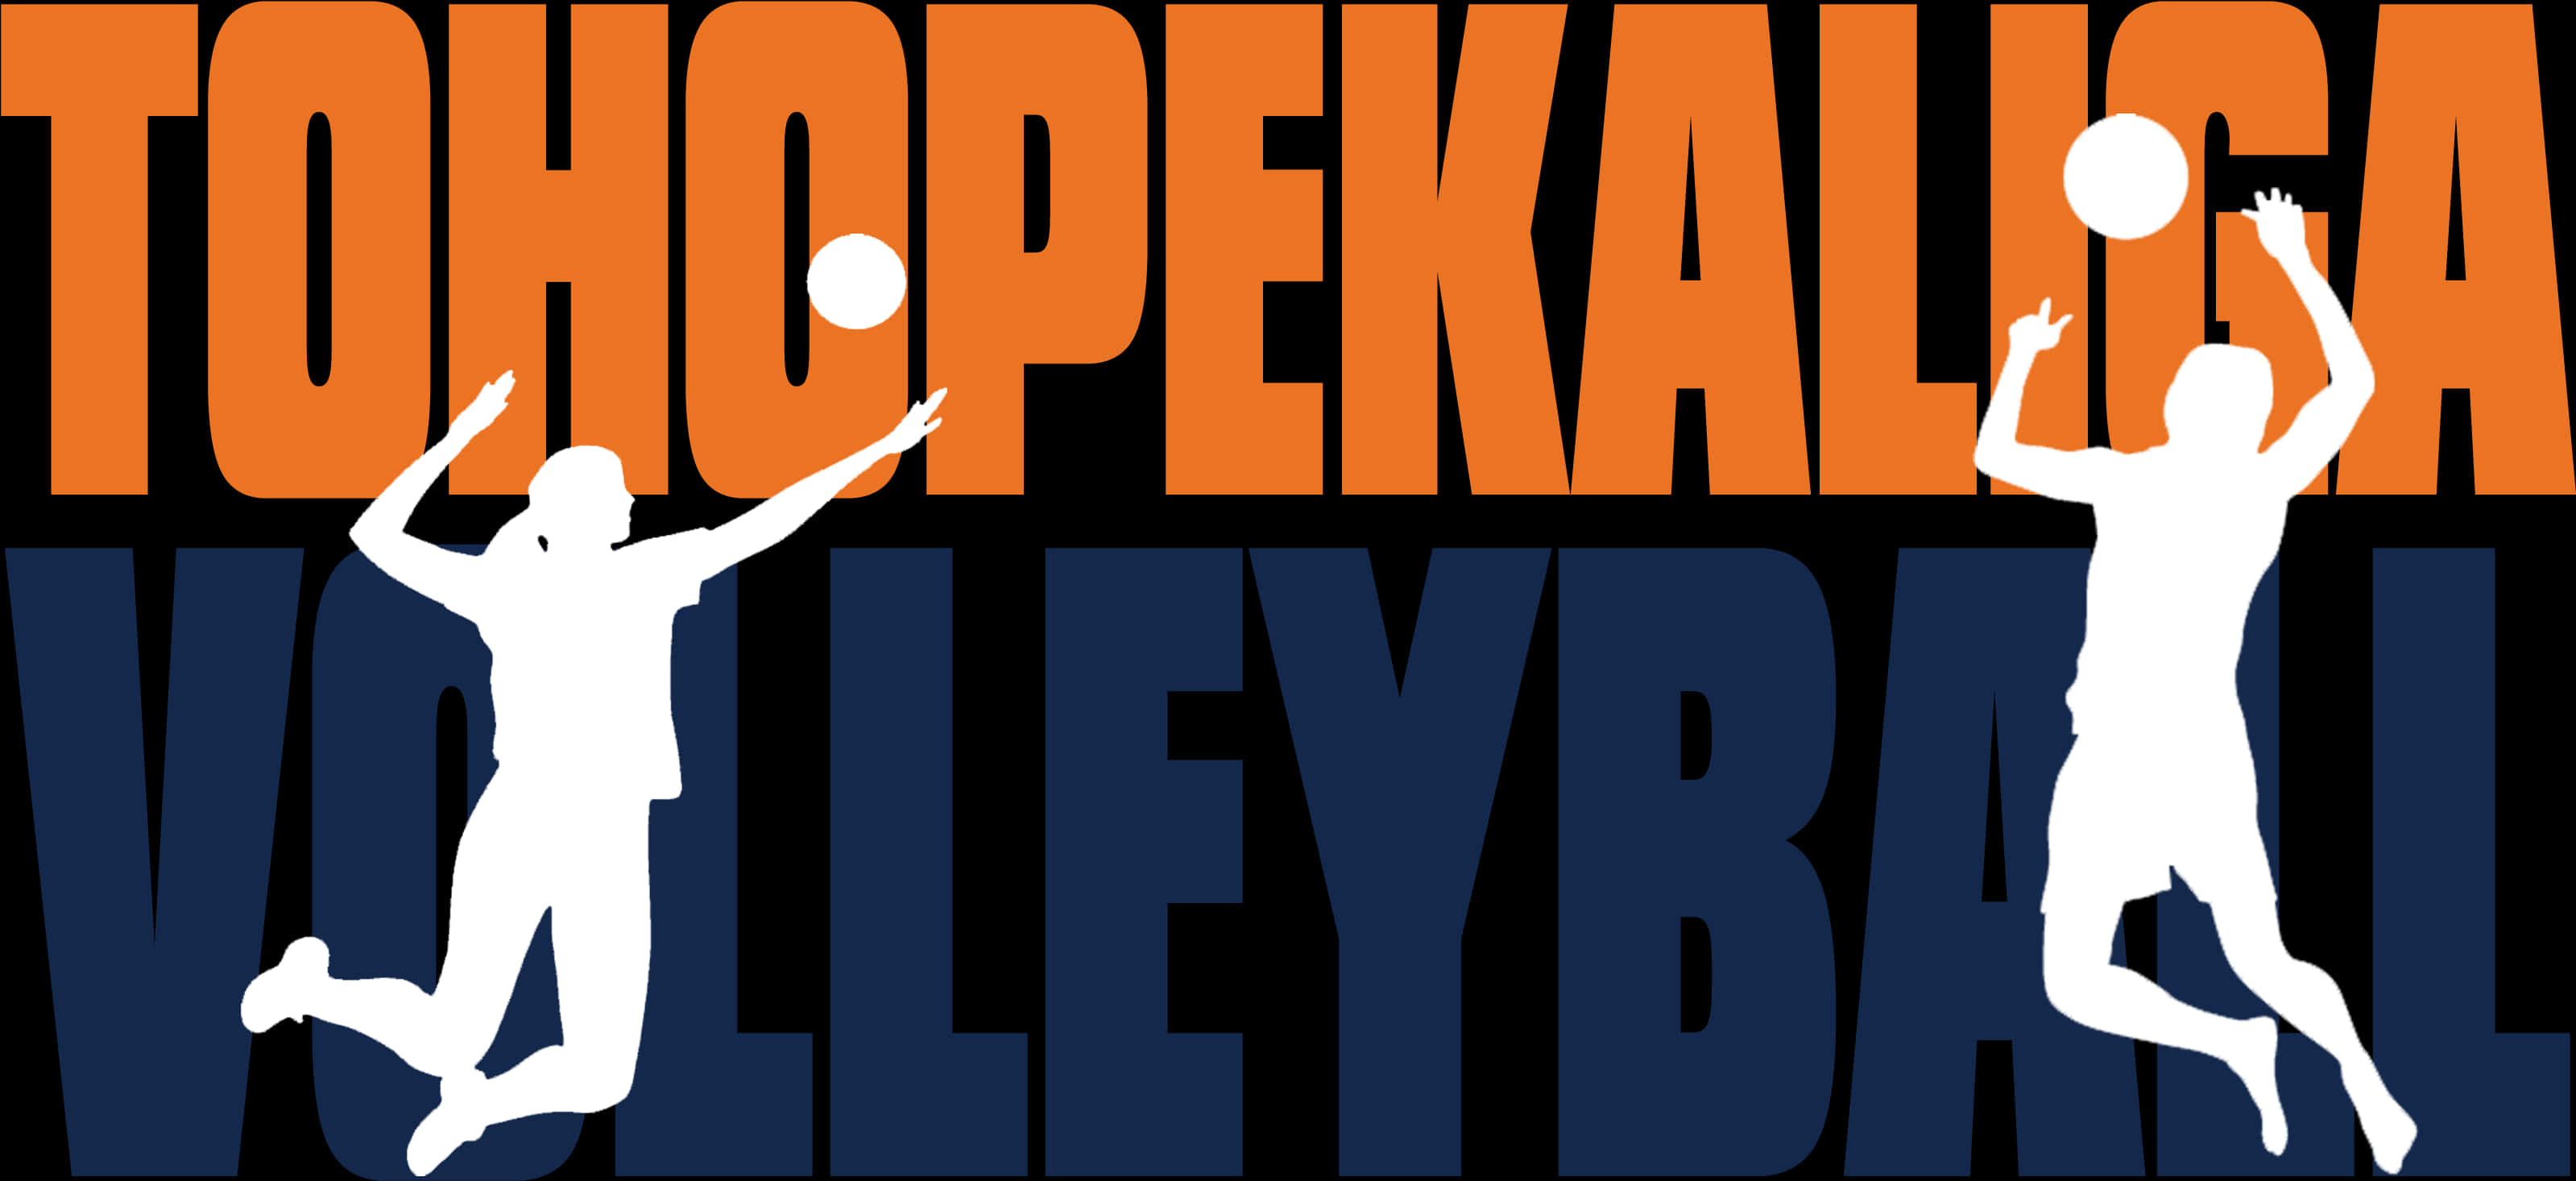 Download Tohopekaliga Volleyball Graphic | Wallpapers.com